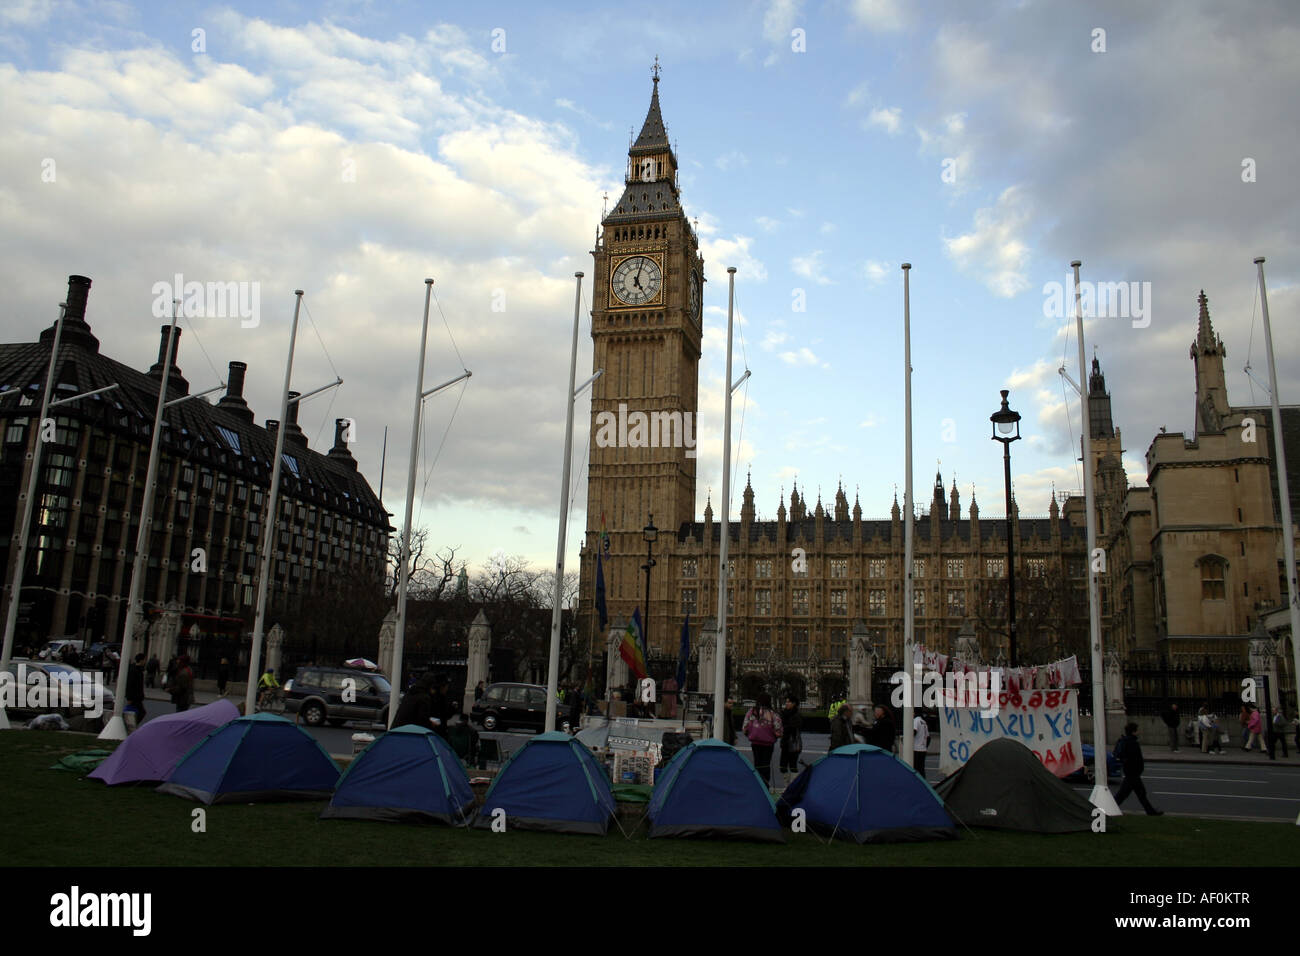 Anti Iraq war protester tents outside Big Ben and Houses of Parliament in London, England, March 21 2007 Stock Photo